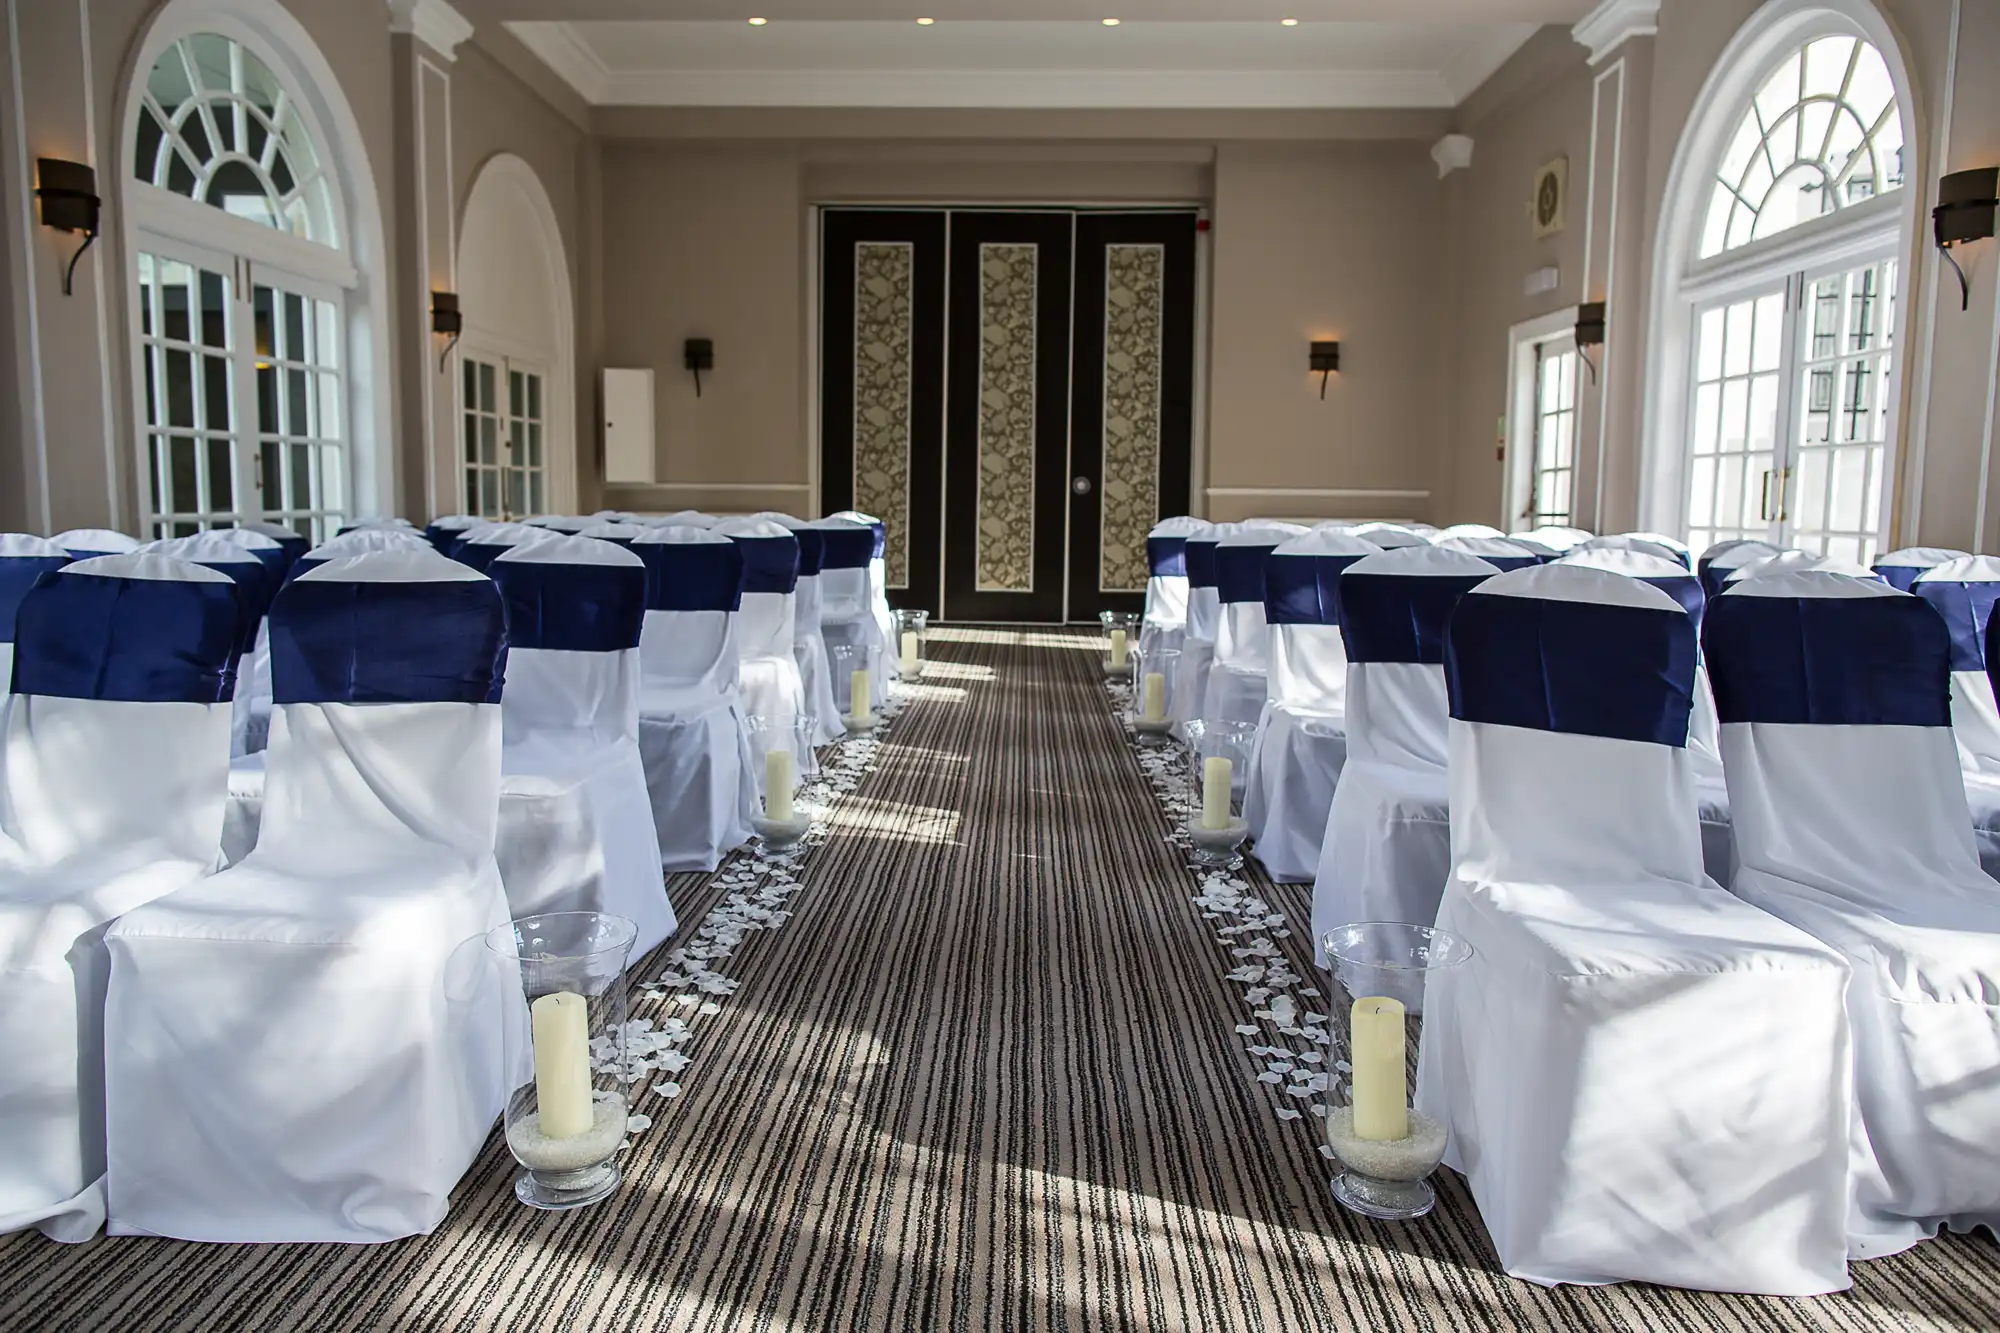 Elegant wedding venue interior with rows of white chairs adorned with dark blue sashes, a patterned aisle runner, and floor candles, illuminated by natural light from large windows.